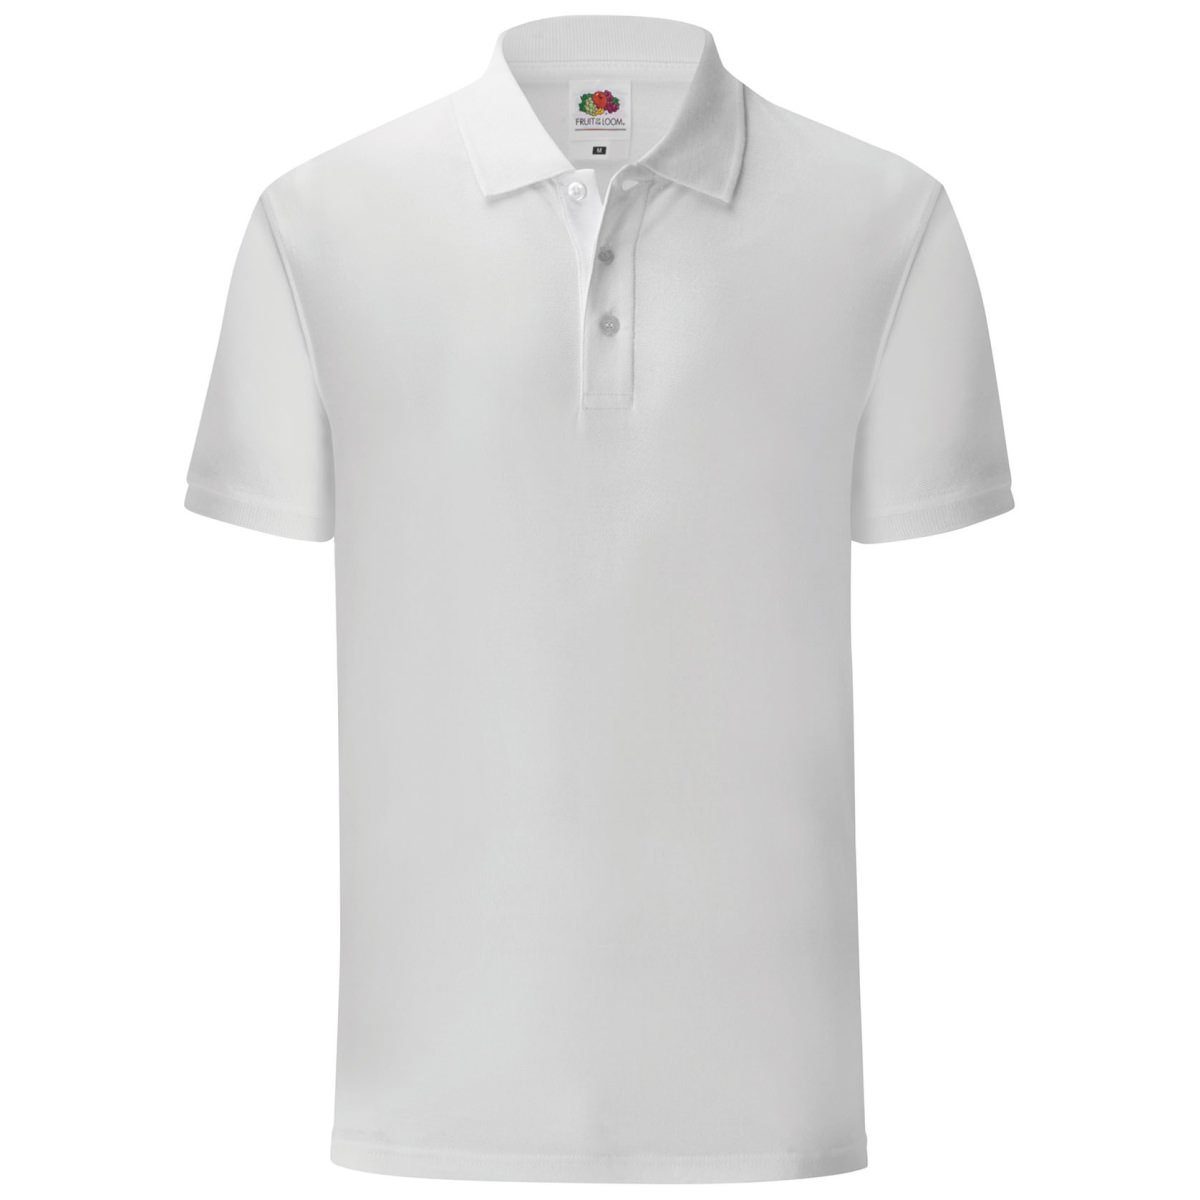 Fruit of the Loom Poloshirt Fruit of the Loom Iconic Polo weiß